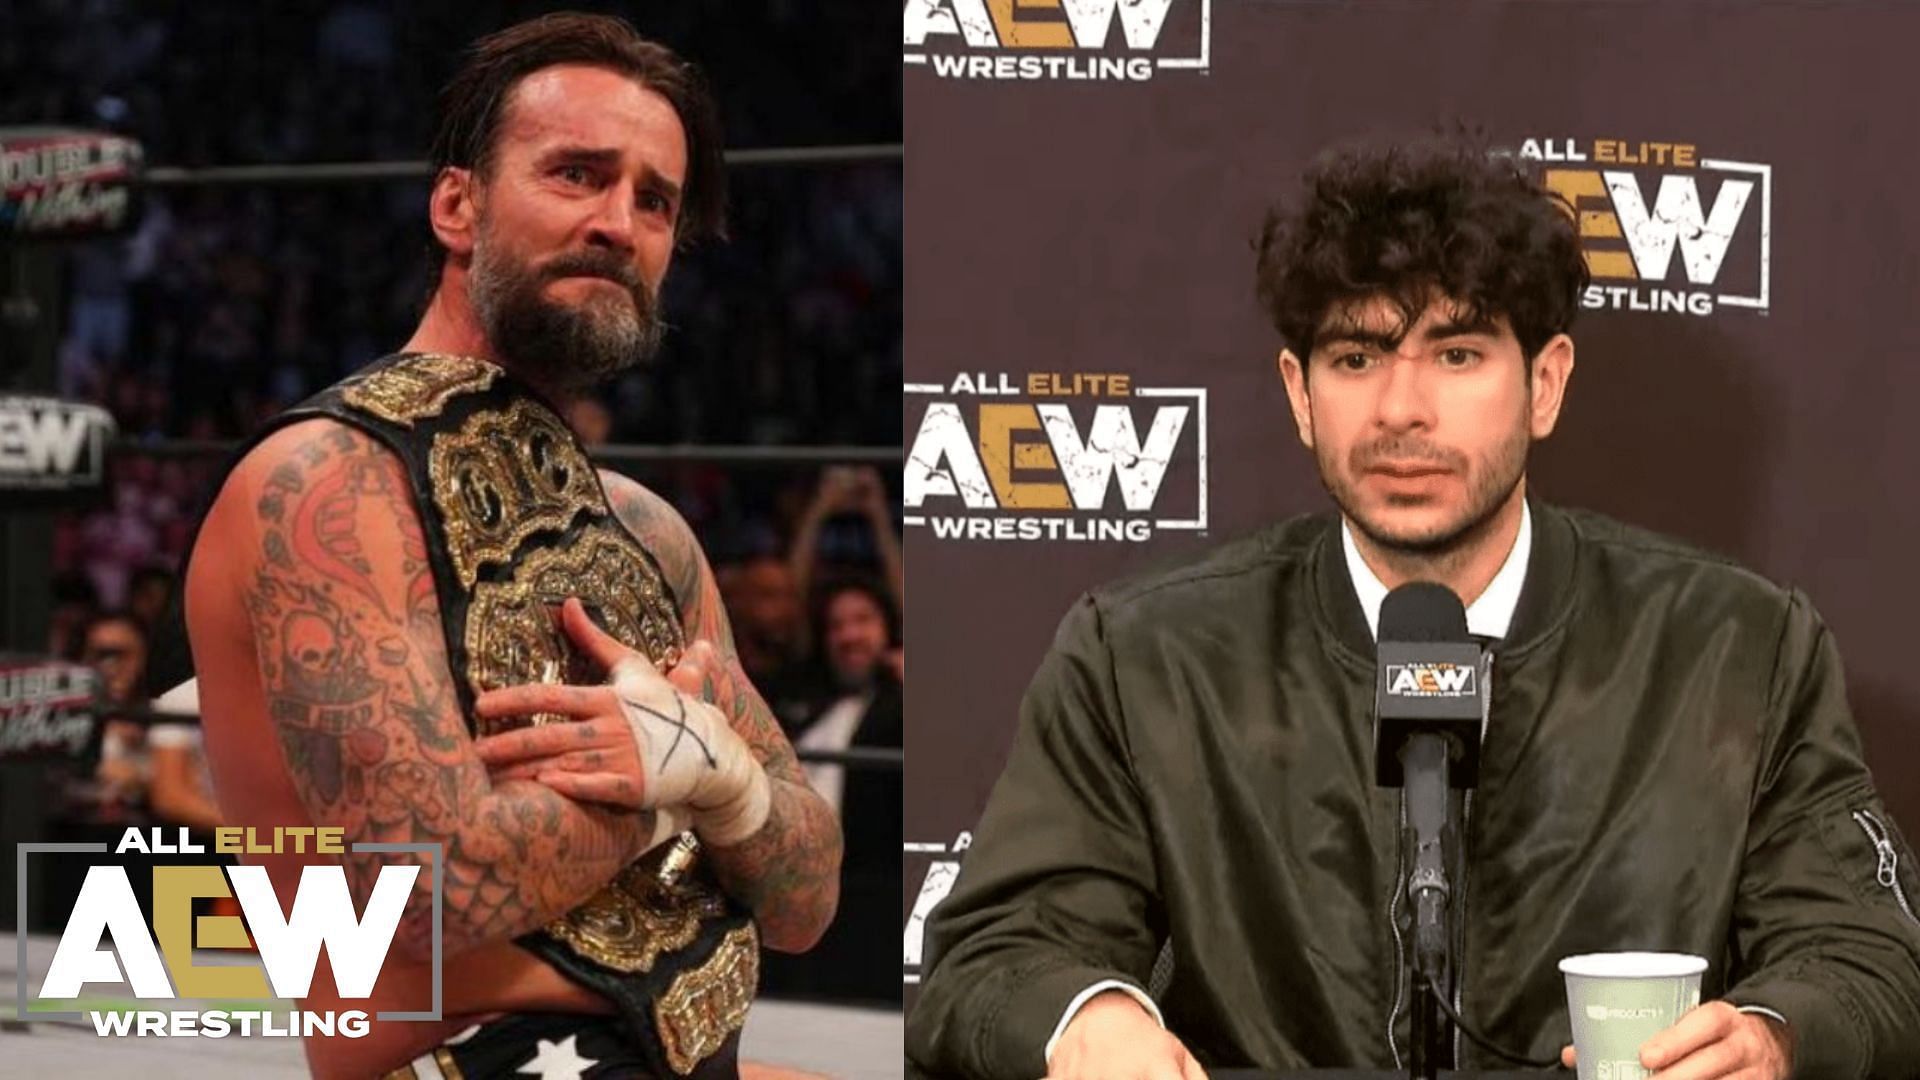 Tony Khan has made a number of mistakes in AEW